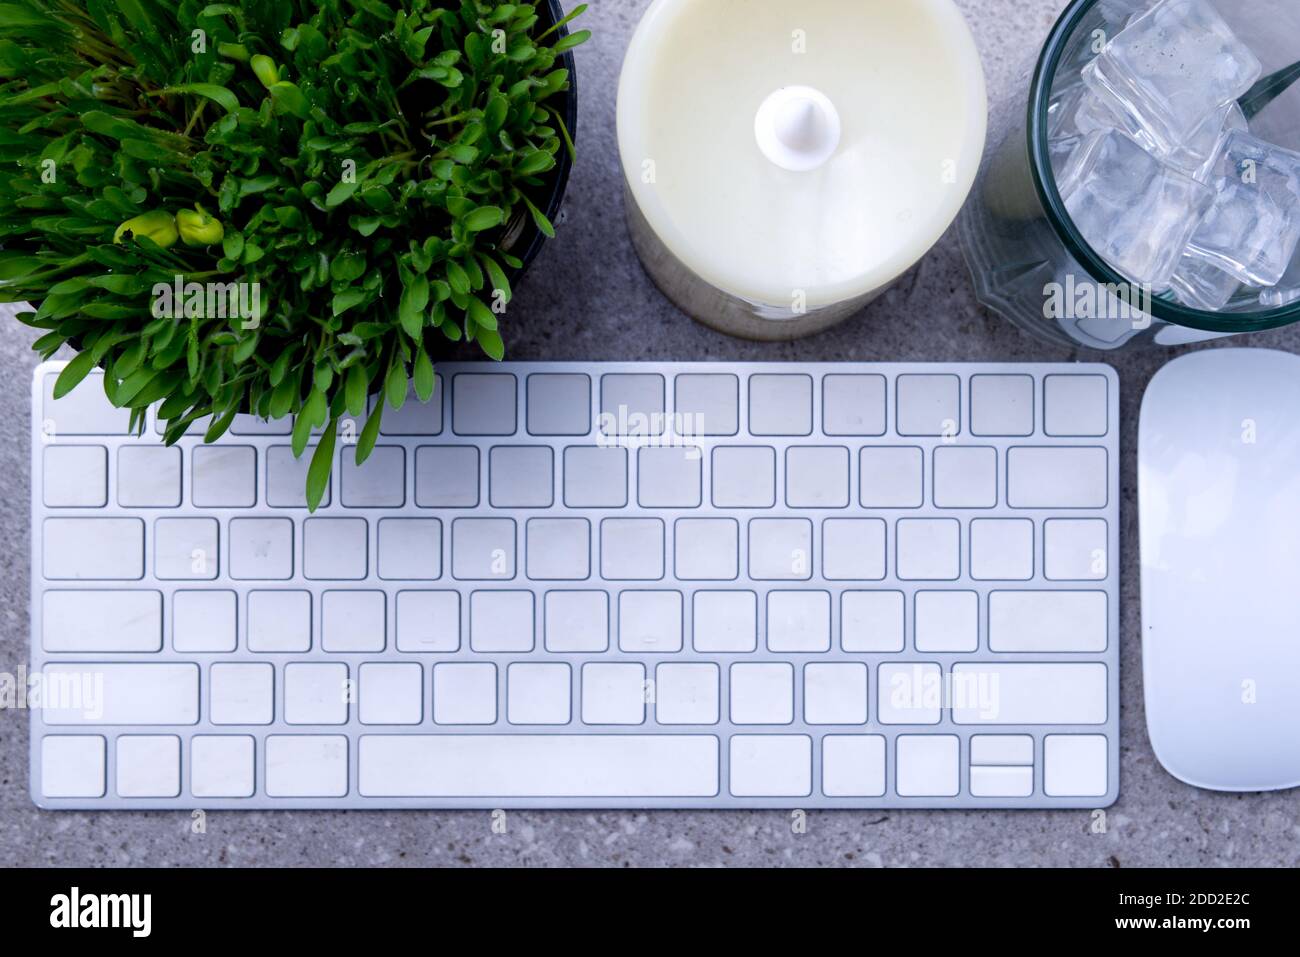 Close up view of millet grass plant in the pot with empty glass with ice cubes and the keyboard on the desk Stock Photo